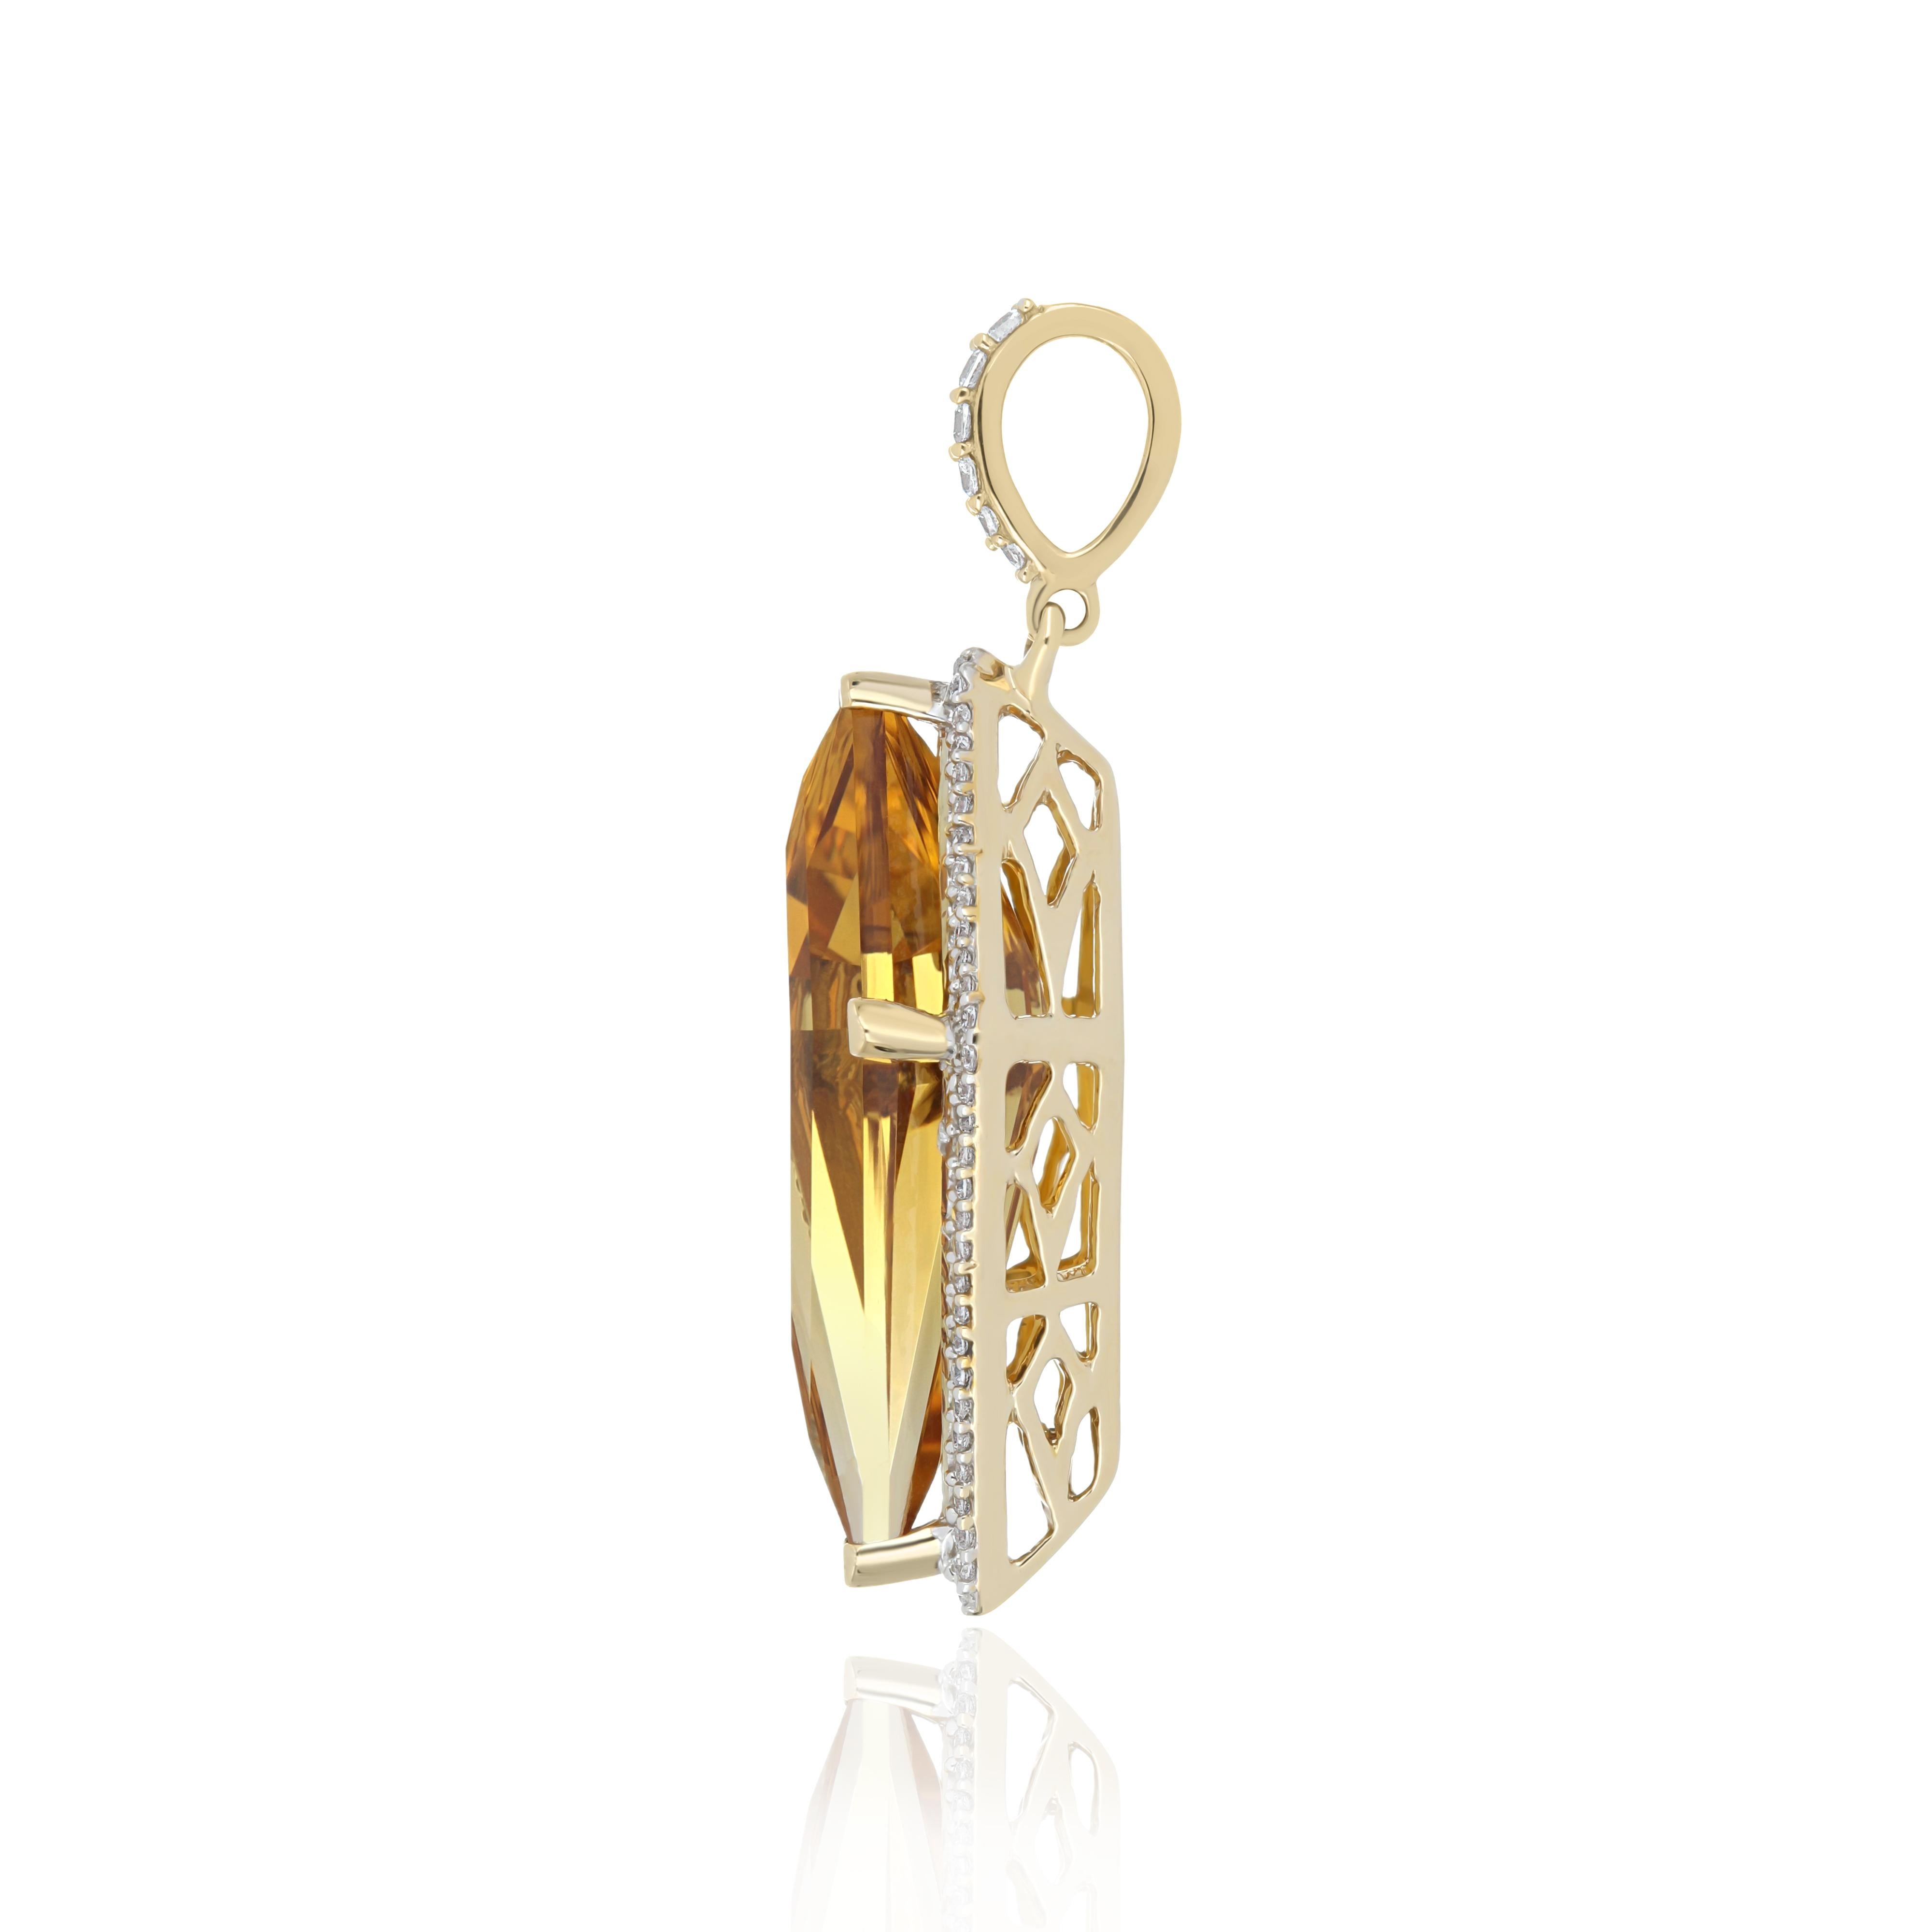 Elegant and Exquisitely detailed cocktail Pendant , Centre Set with vibrant Fancy Kite Shaped Citrine Weighing approx. 7.80 Cts accented with halo of Micro Pave Set Diamonds weighing approx. 0.21 Cts, Beautifully Hand Crafted in 14 Karat Yellow